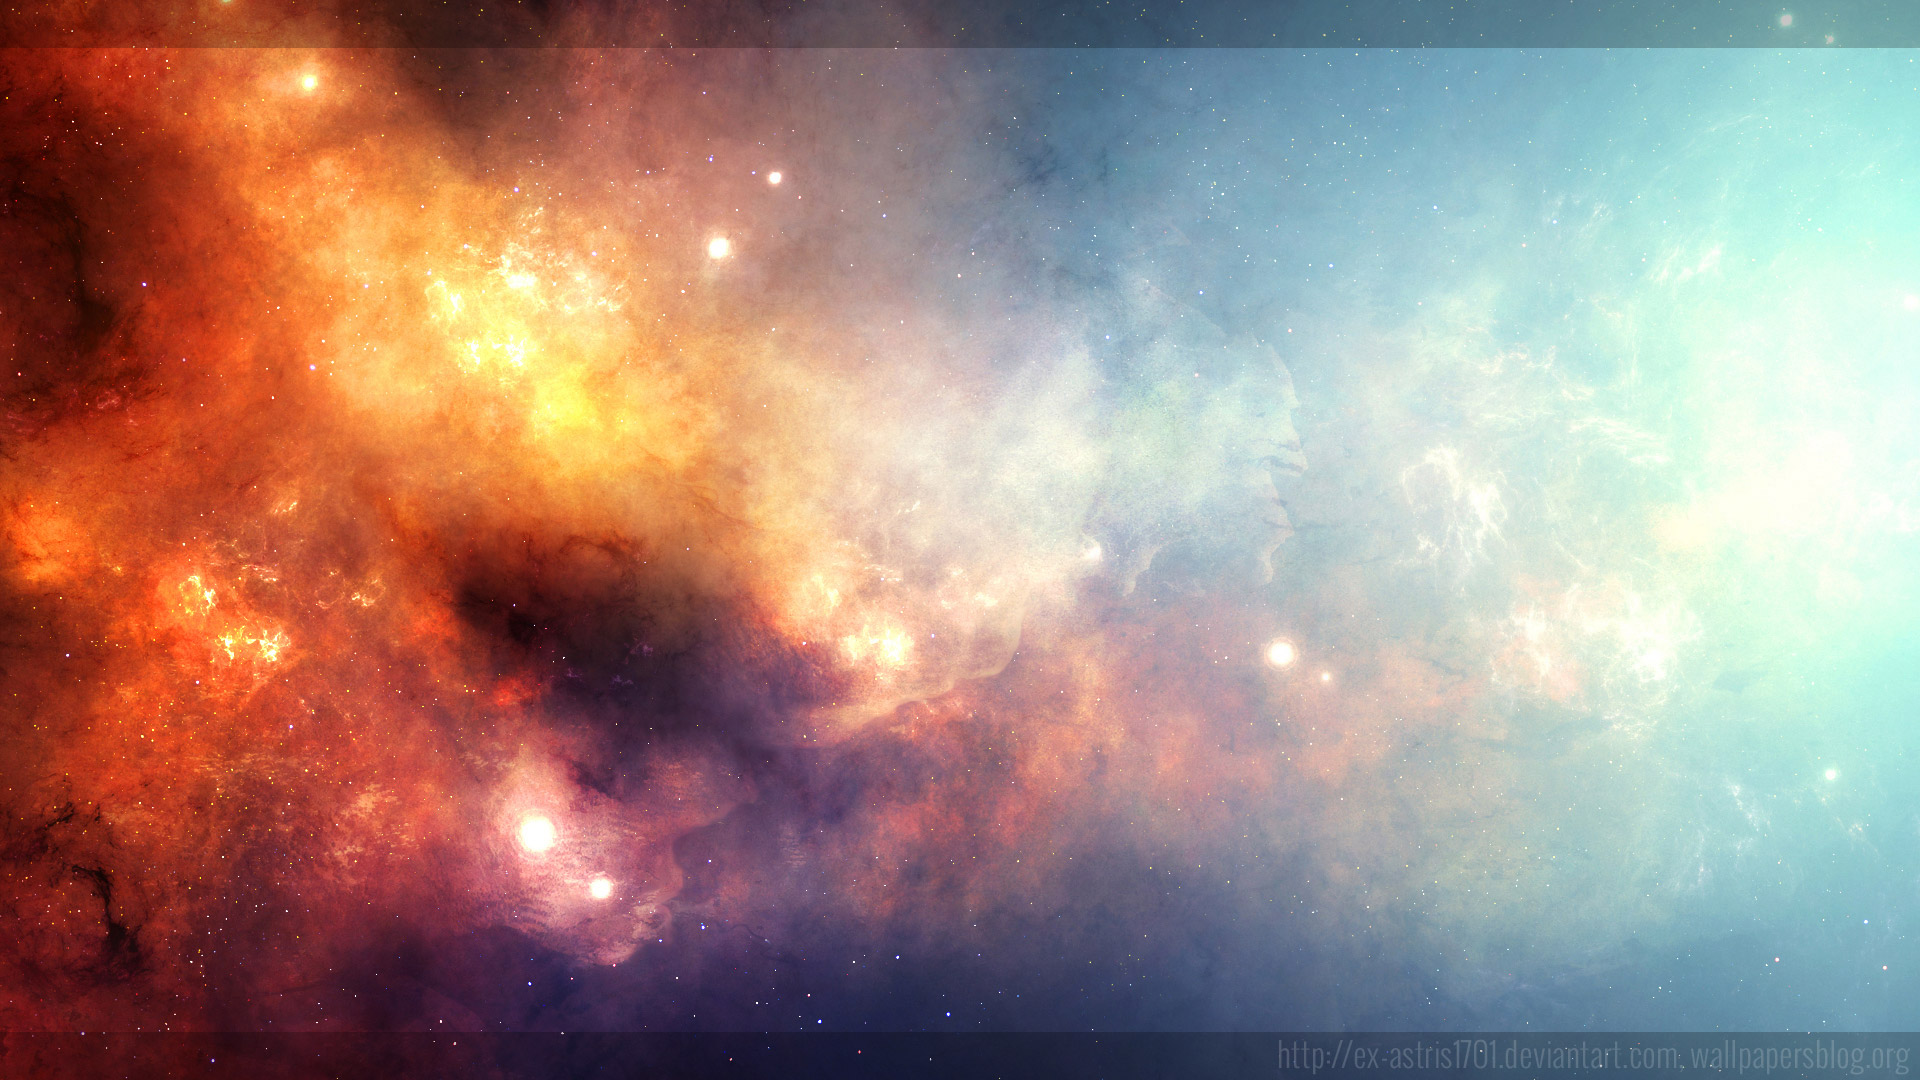 wallpapers 1920x1080 full hd 1080p,sky,atmospheric phenomenon,atmosphere,nebula,astronomical object